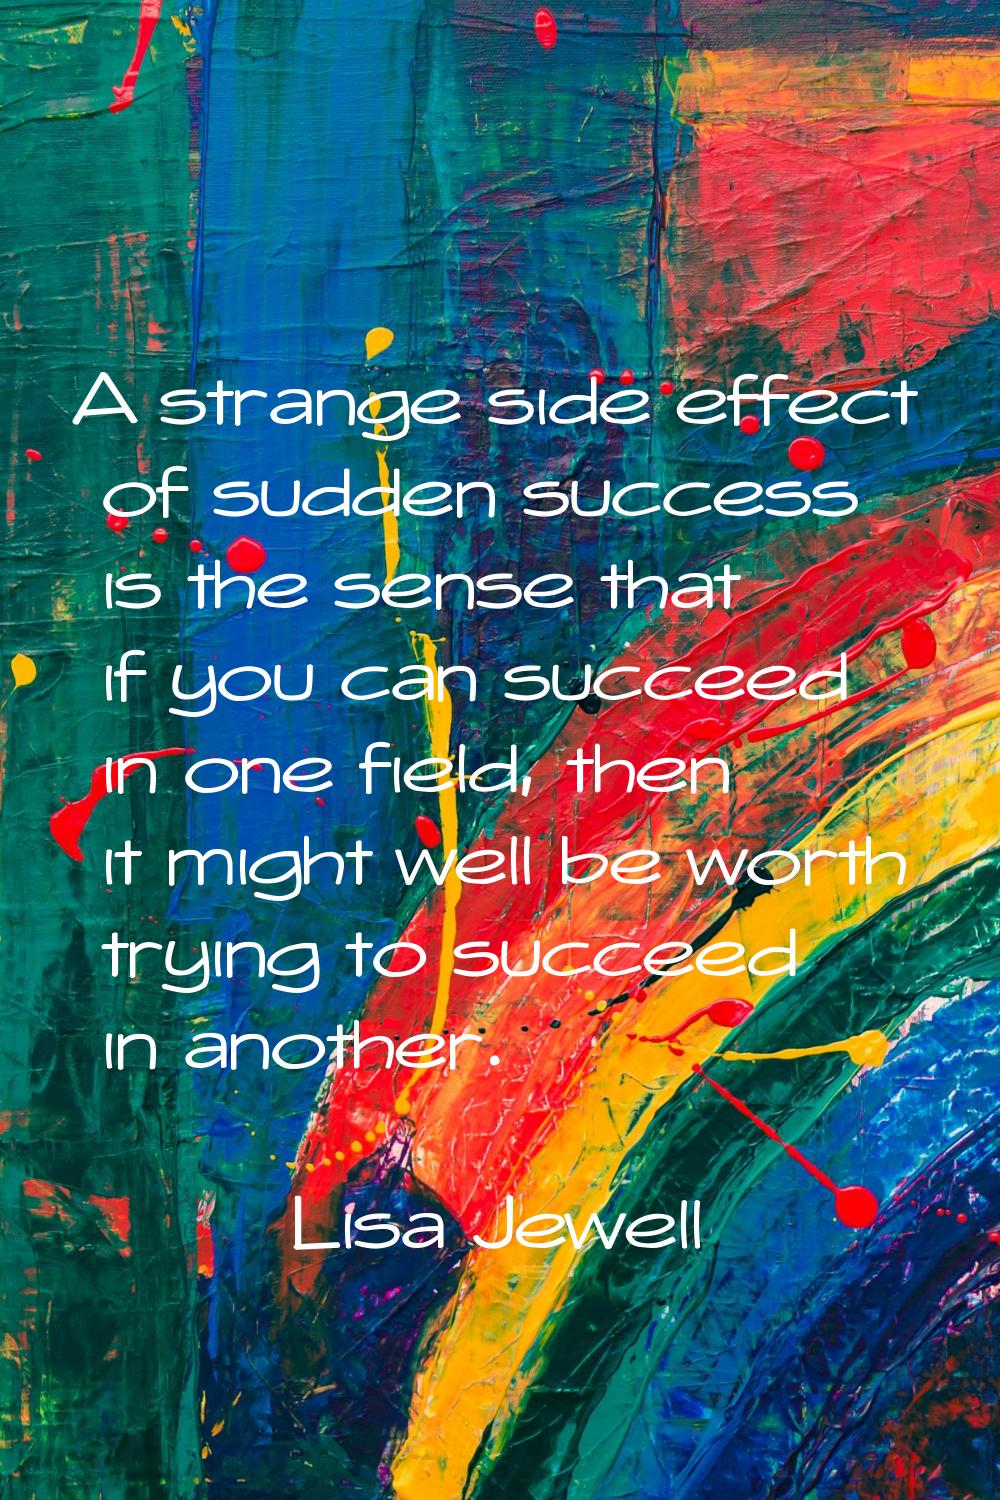 A strange side effect of sudden success is the sense that if you can succeed in one field, then it 